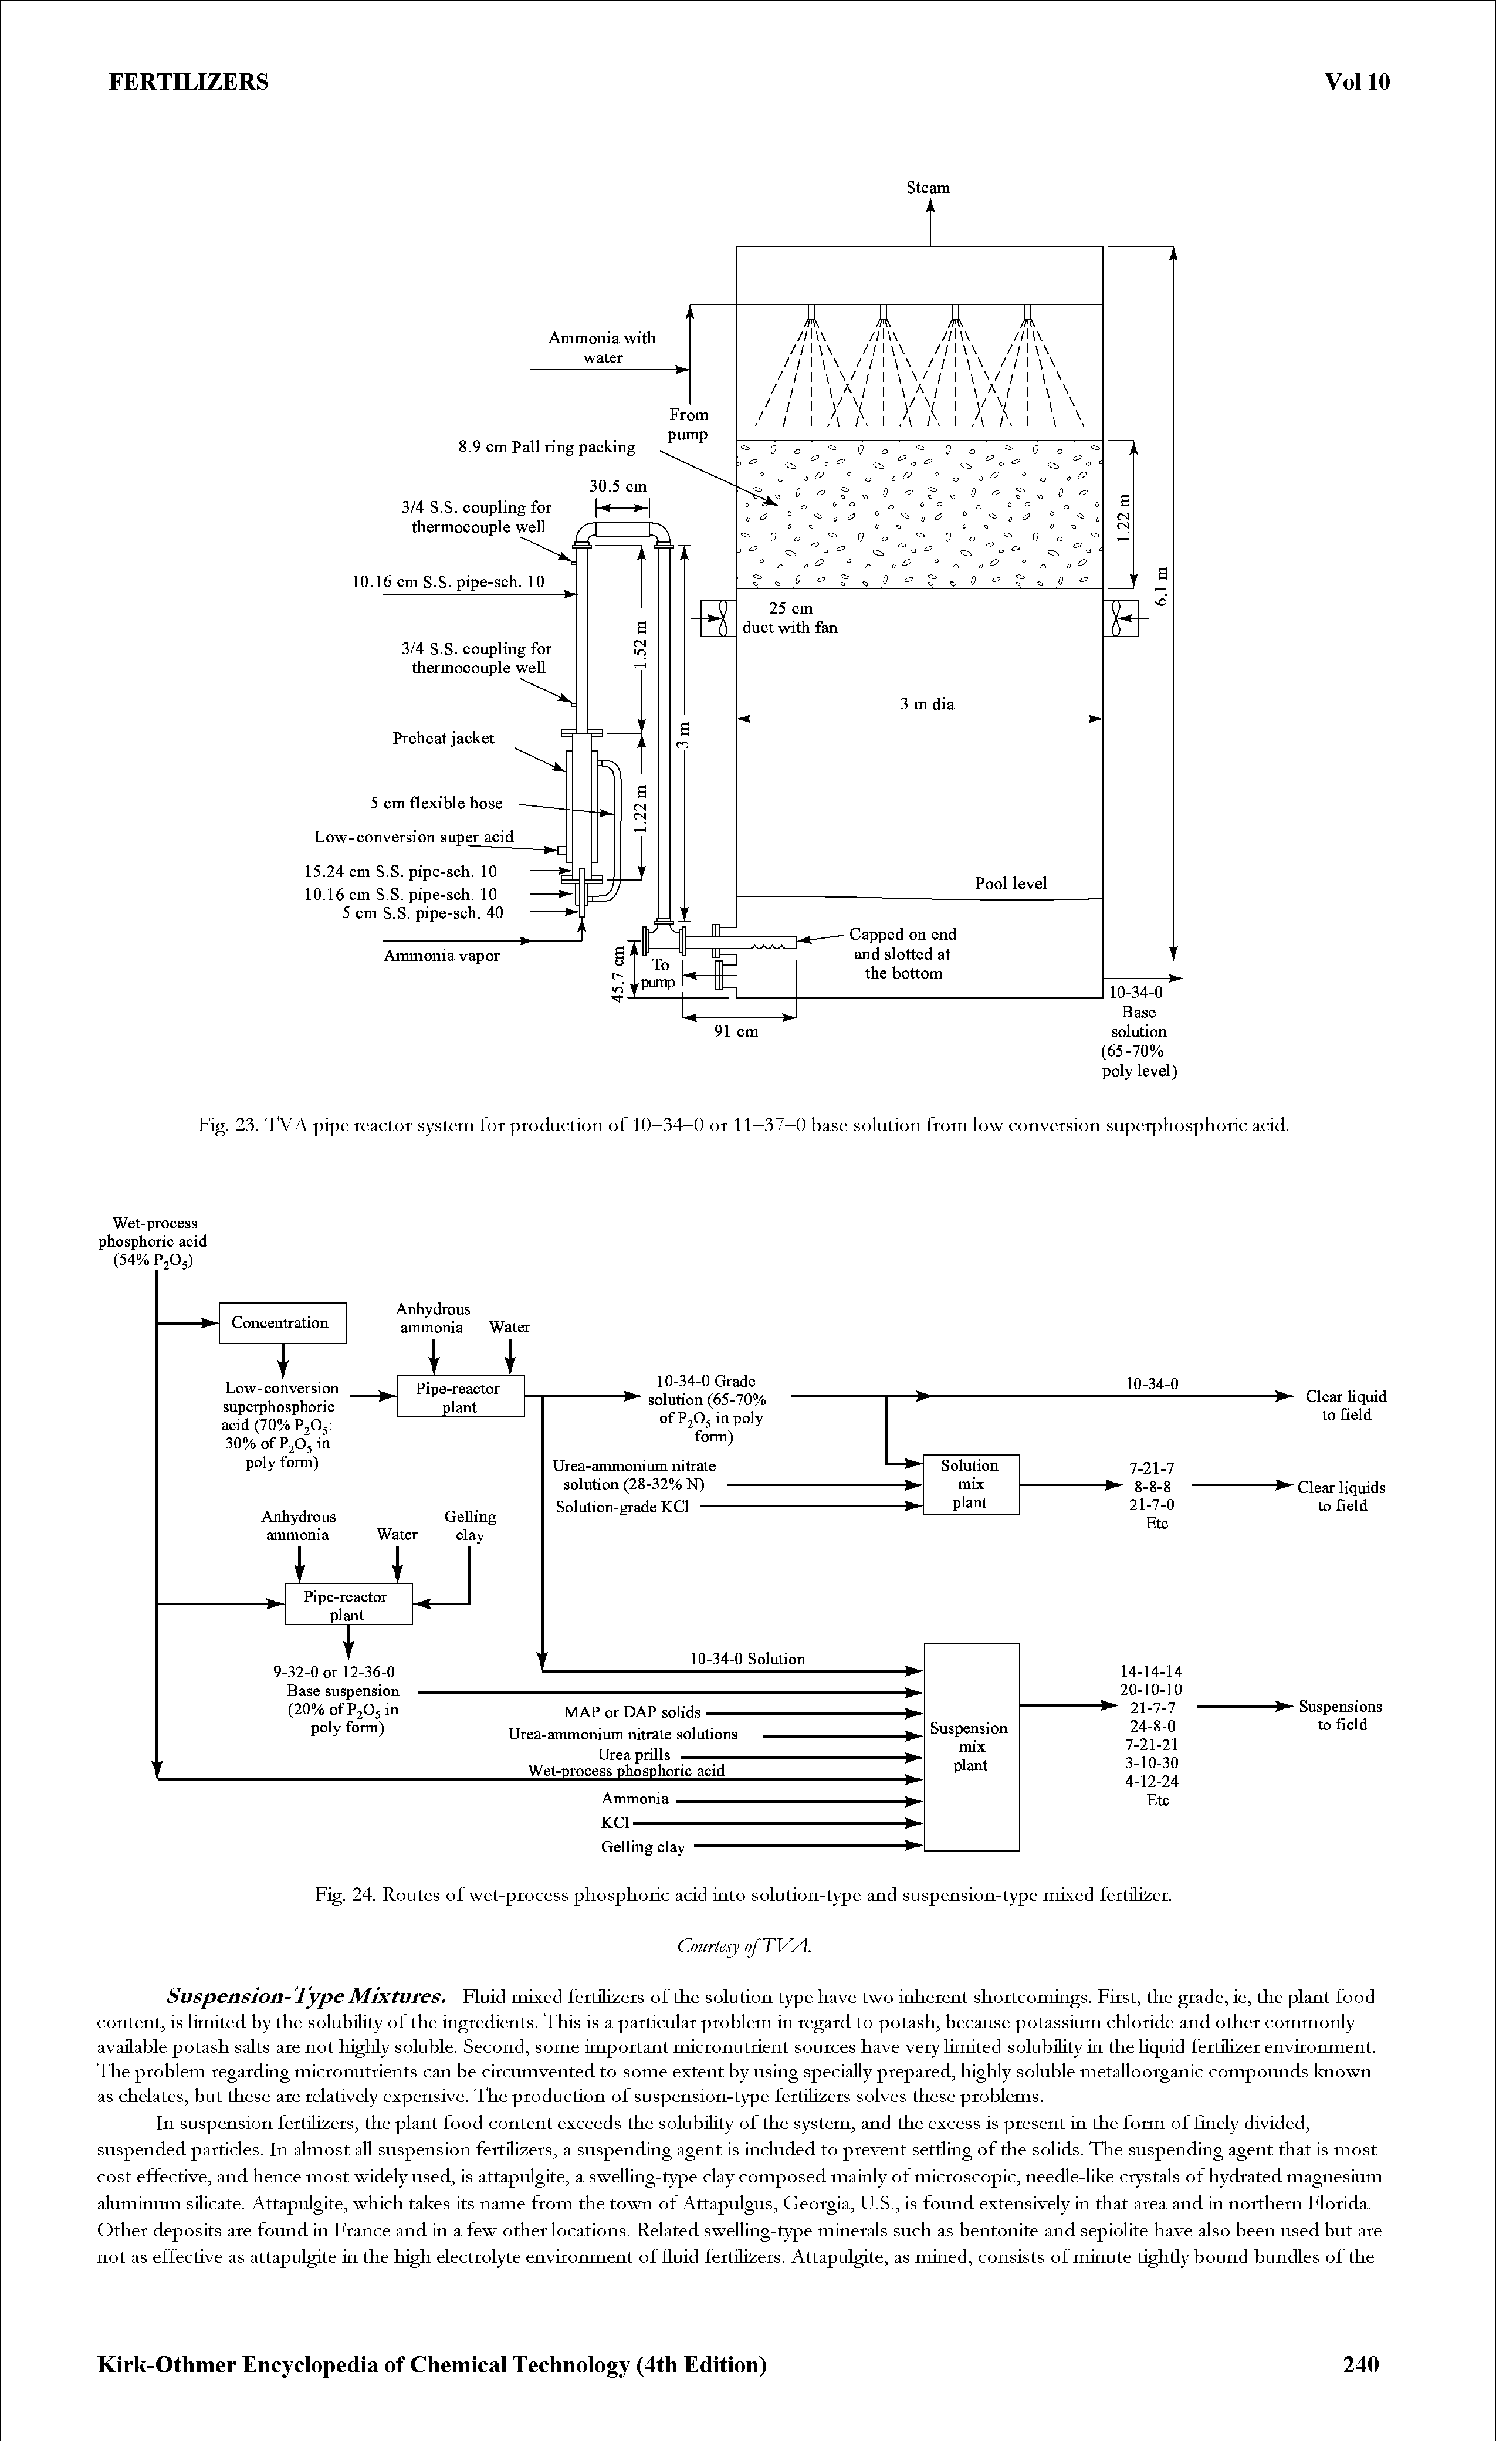 Fig. 23. TVA pipe reactor system for production of 10—34—0 or 11-37-0 base solution from low conversion superphosphoric acid.